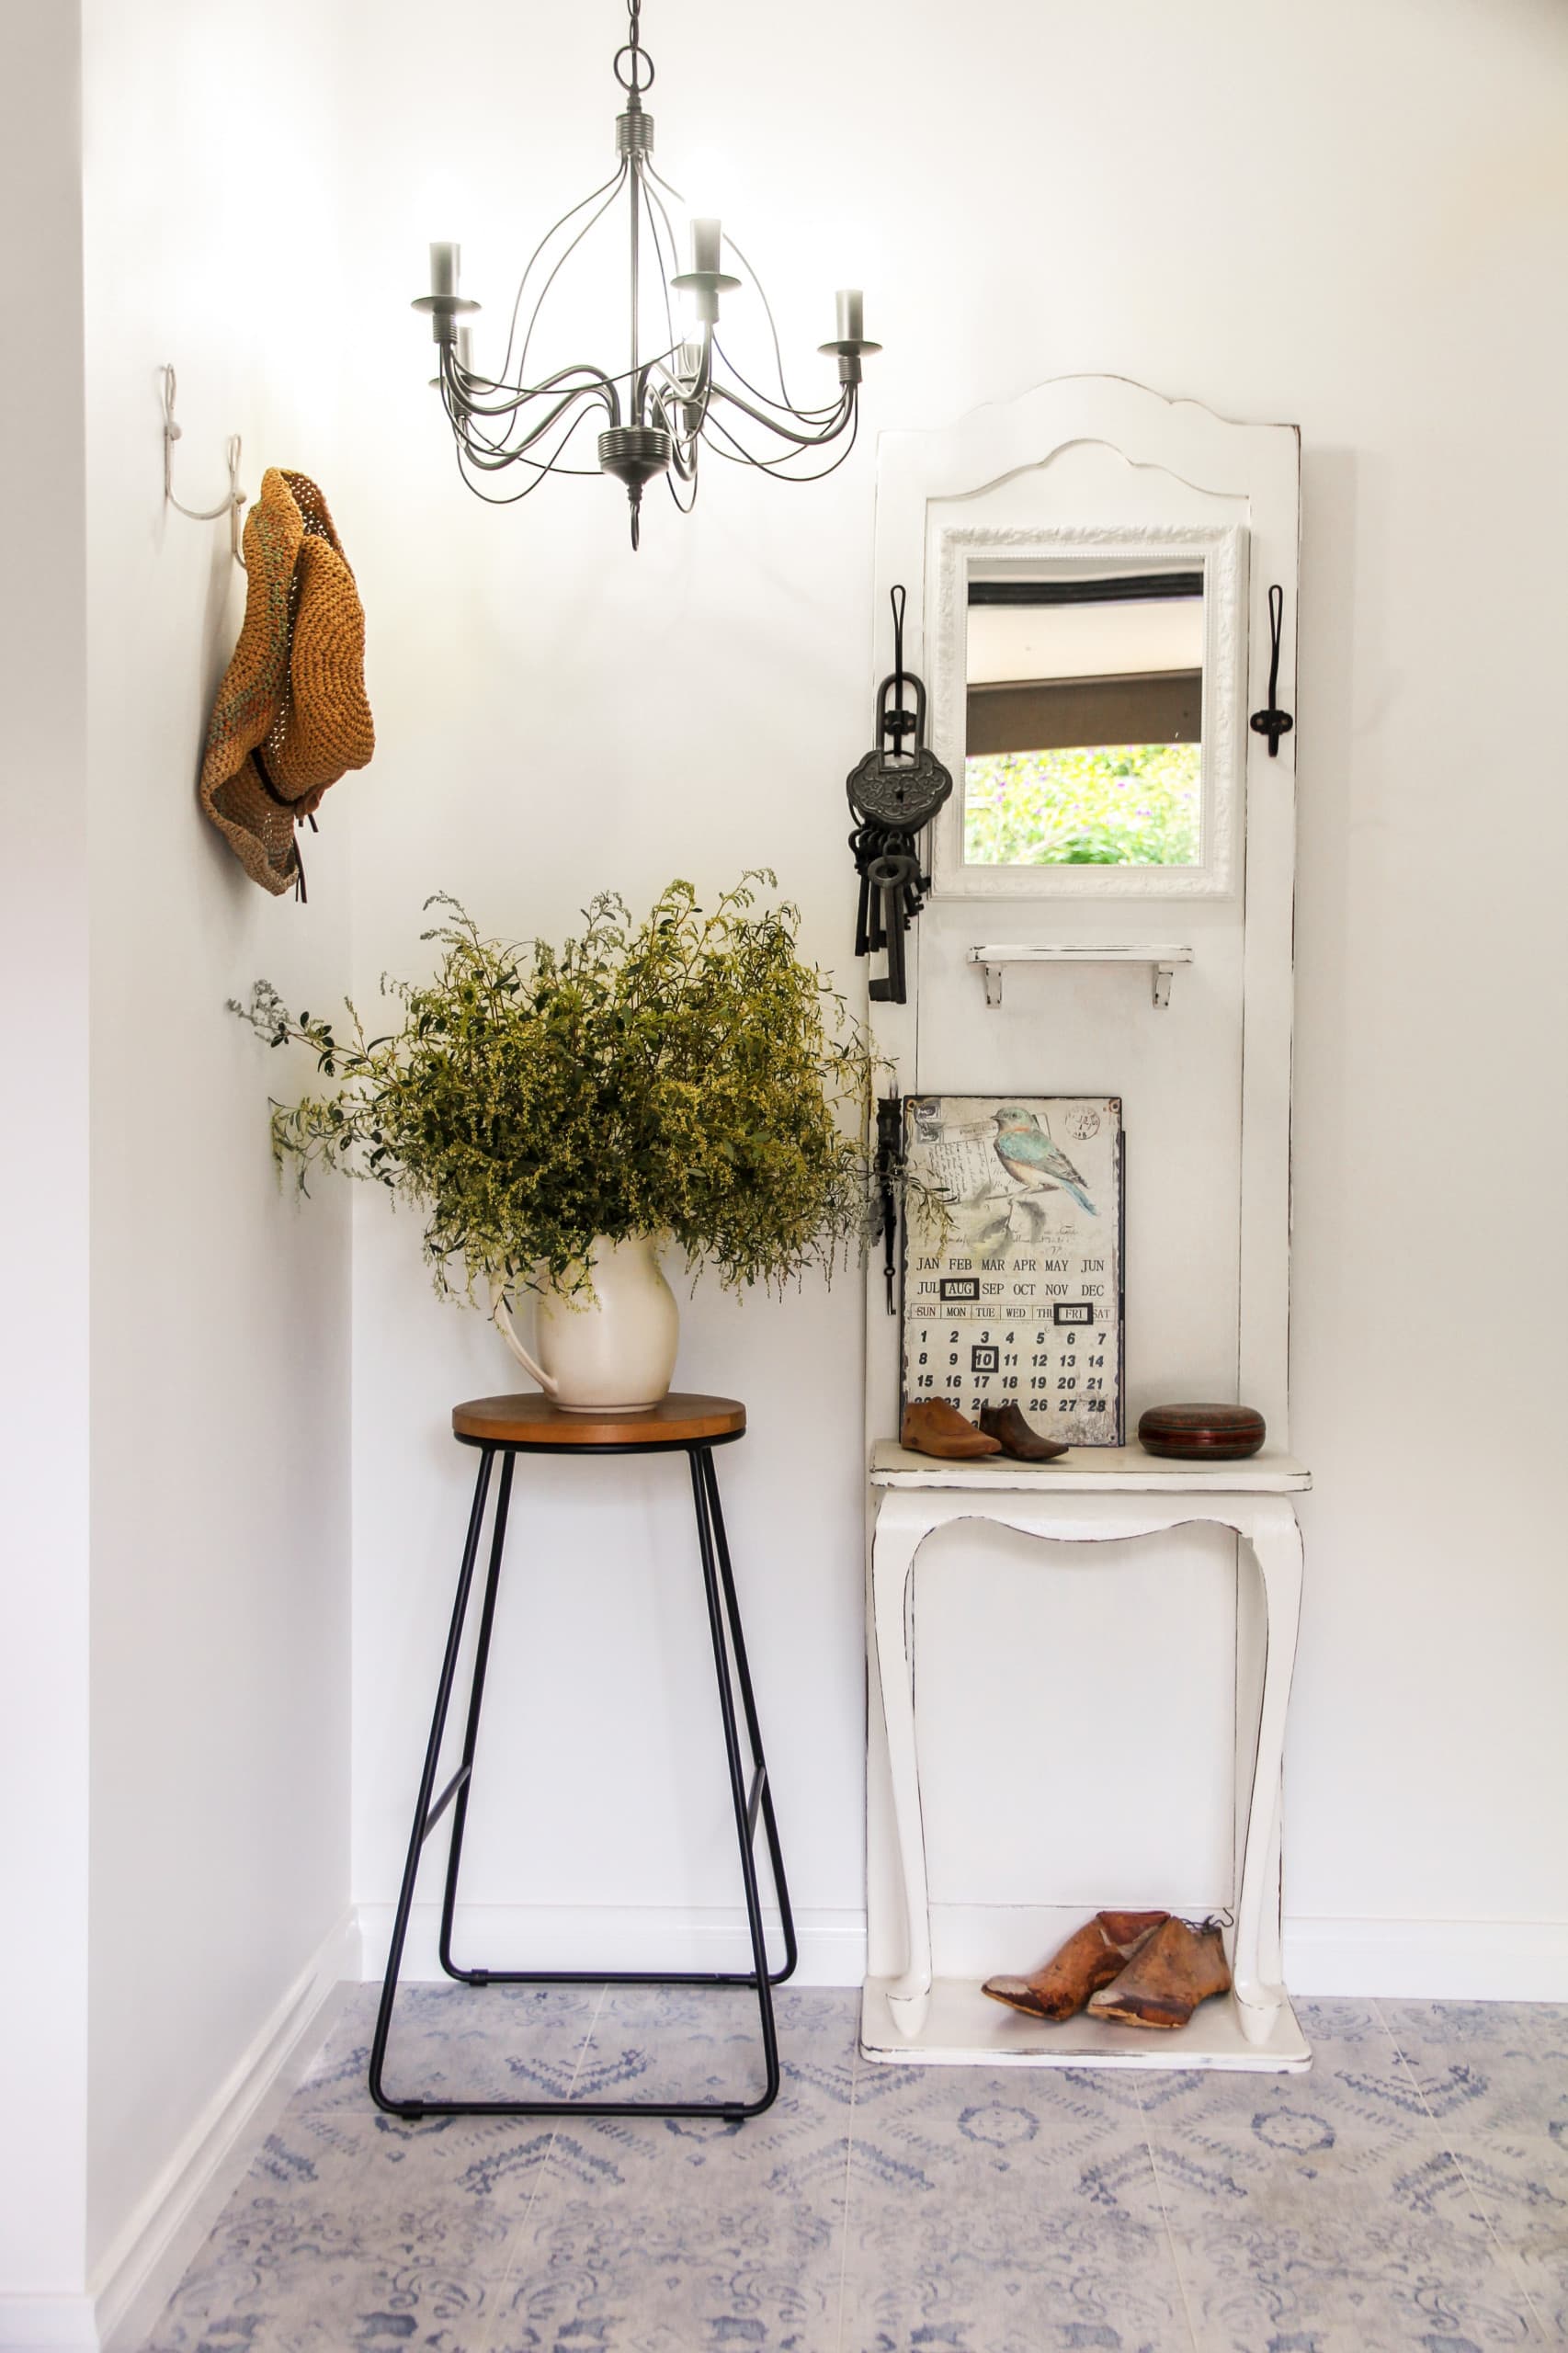 21 Small Entryway Ideas for a Grand Entrance, No Matter the Size